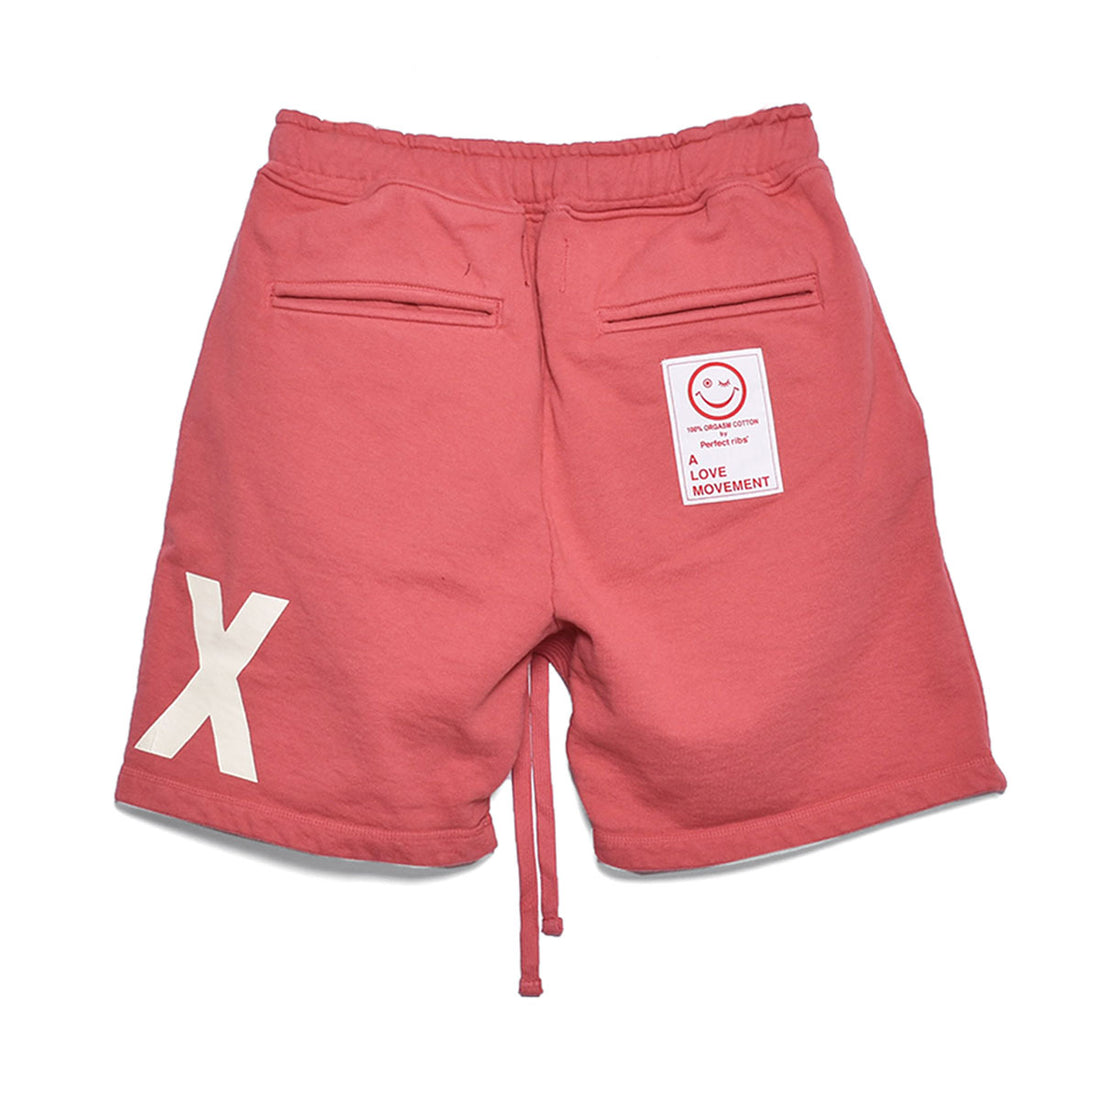 [Perfect ribs]adios&RELAX -large- Basic Sweat Short Pants/RED(PR412037A)